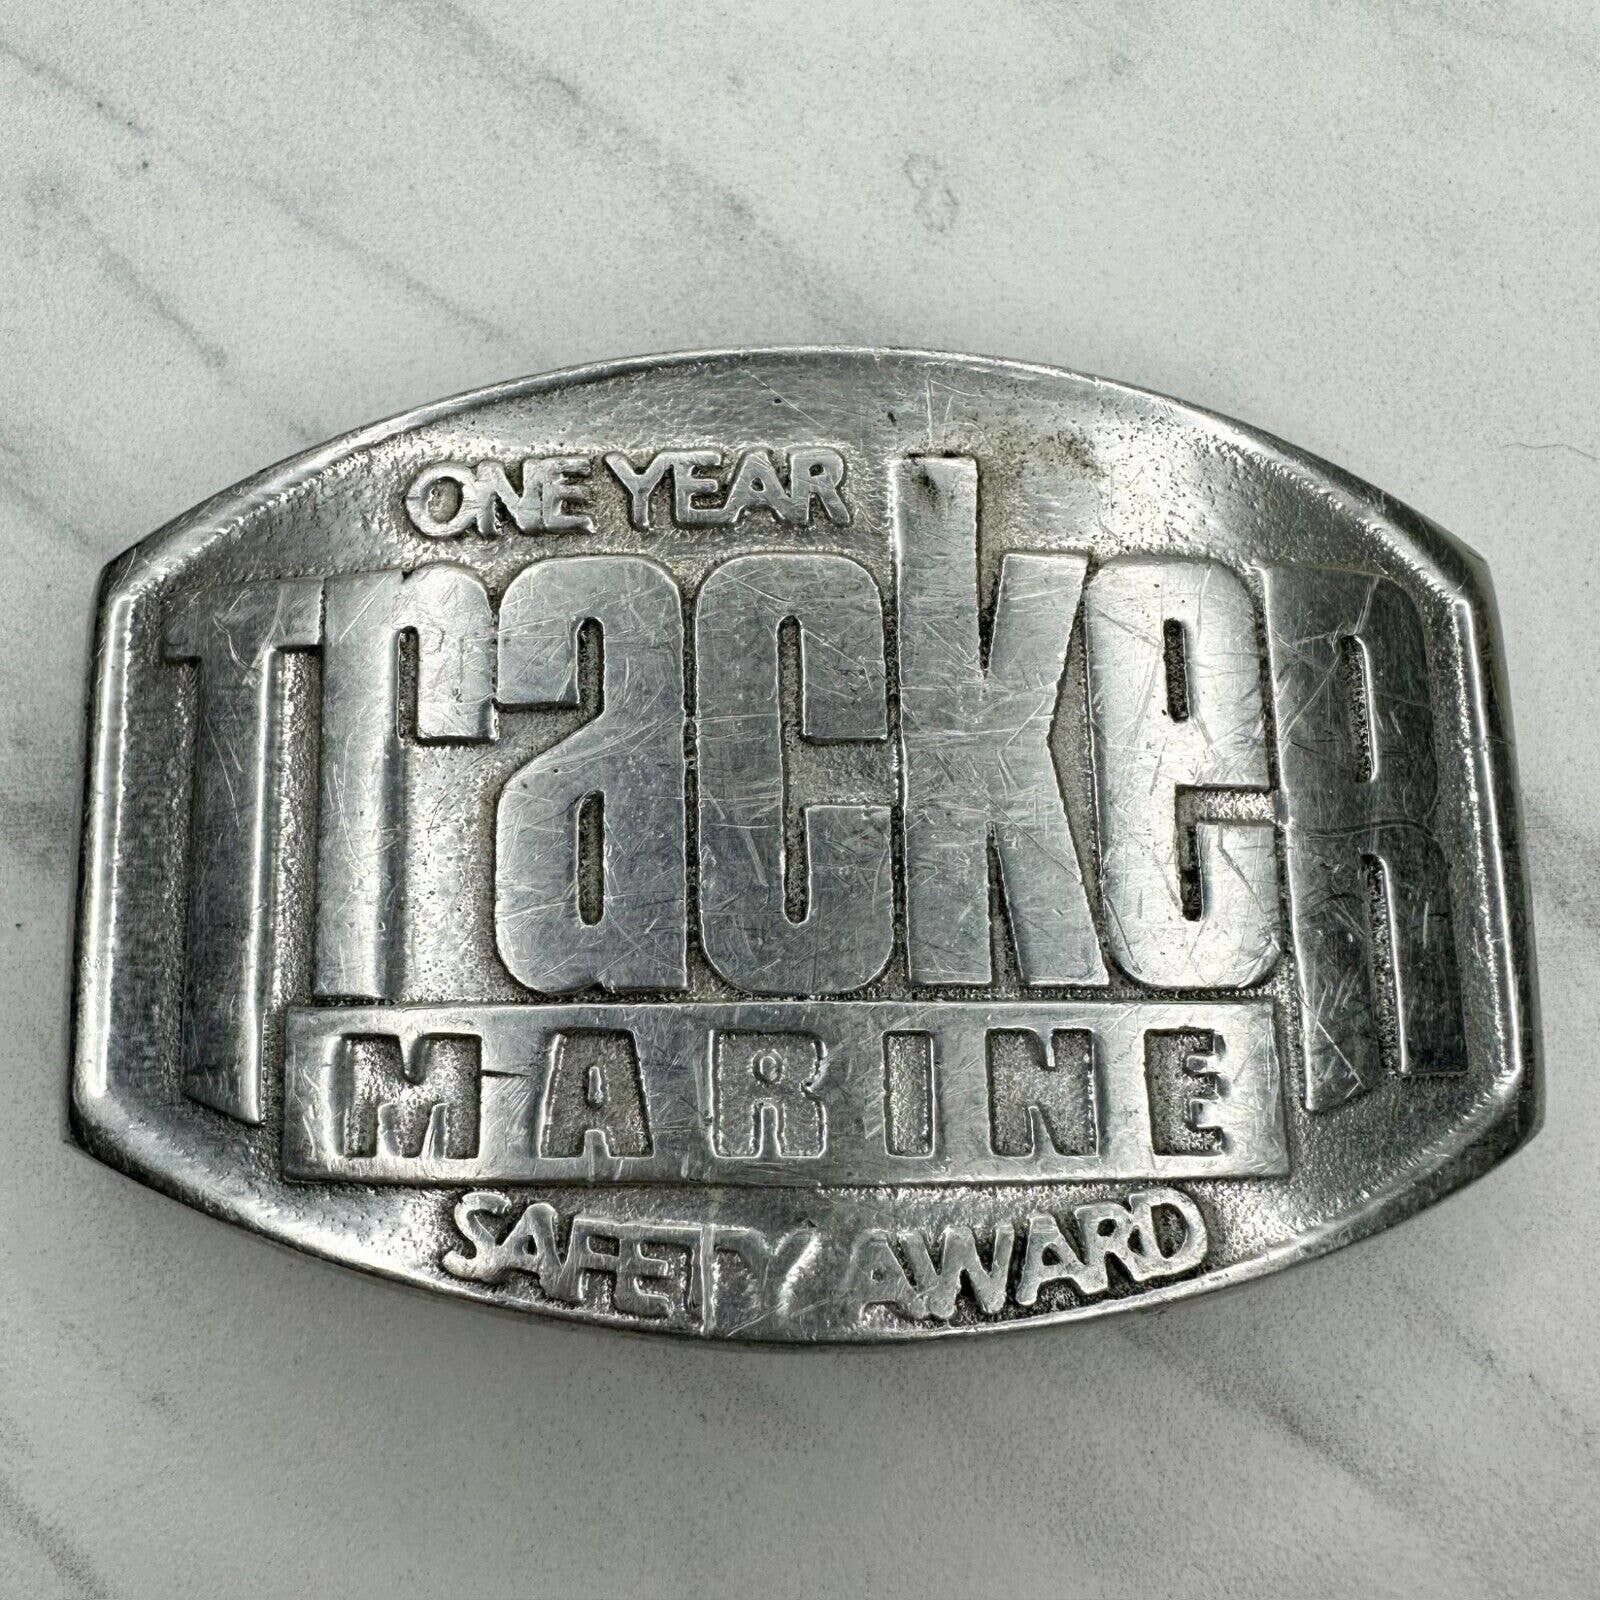 Primary image for Vintage Tracker Marine One Year Safety Award Belt Buckle